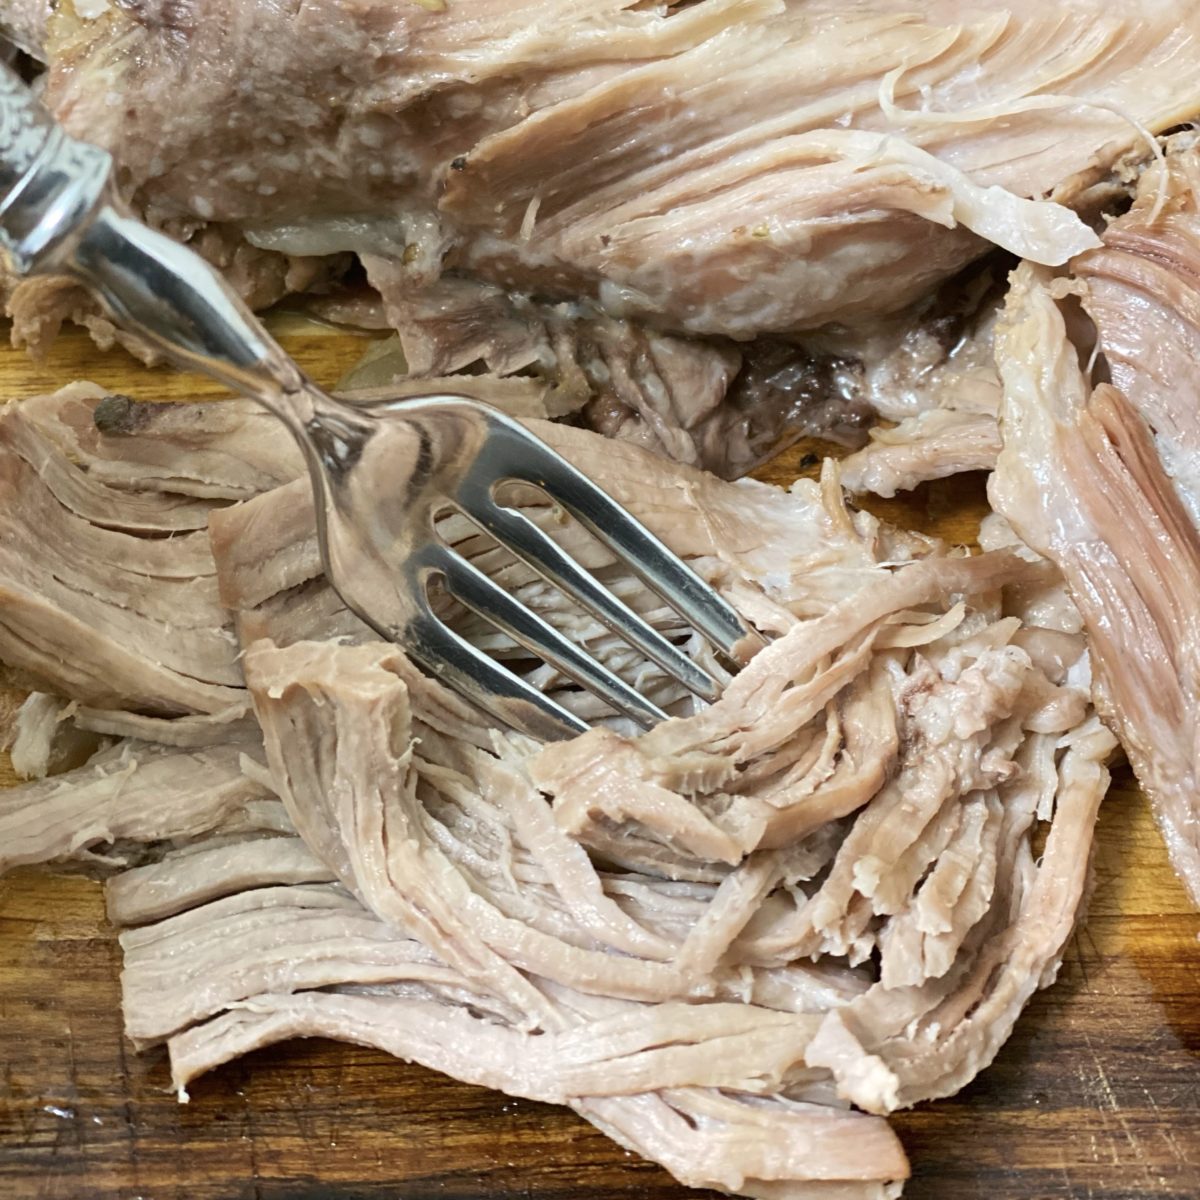 A fork pulling apart the meat of the cooked pork roast.